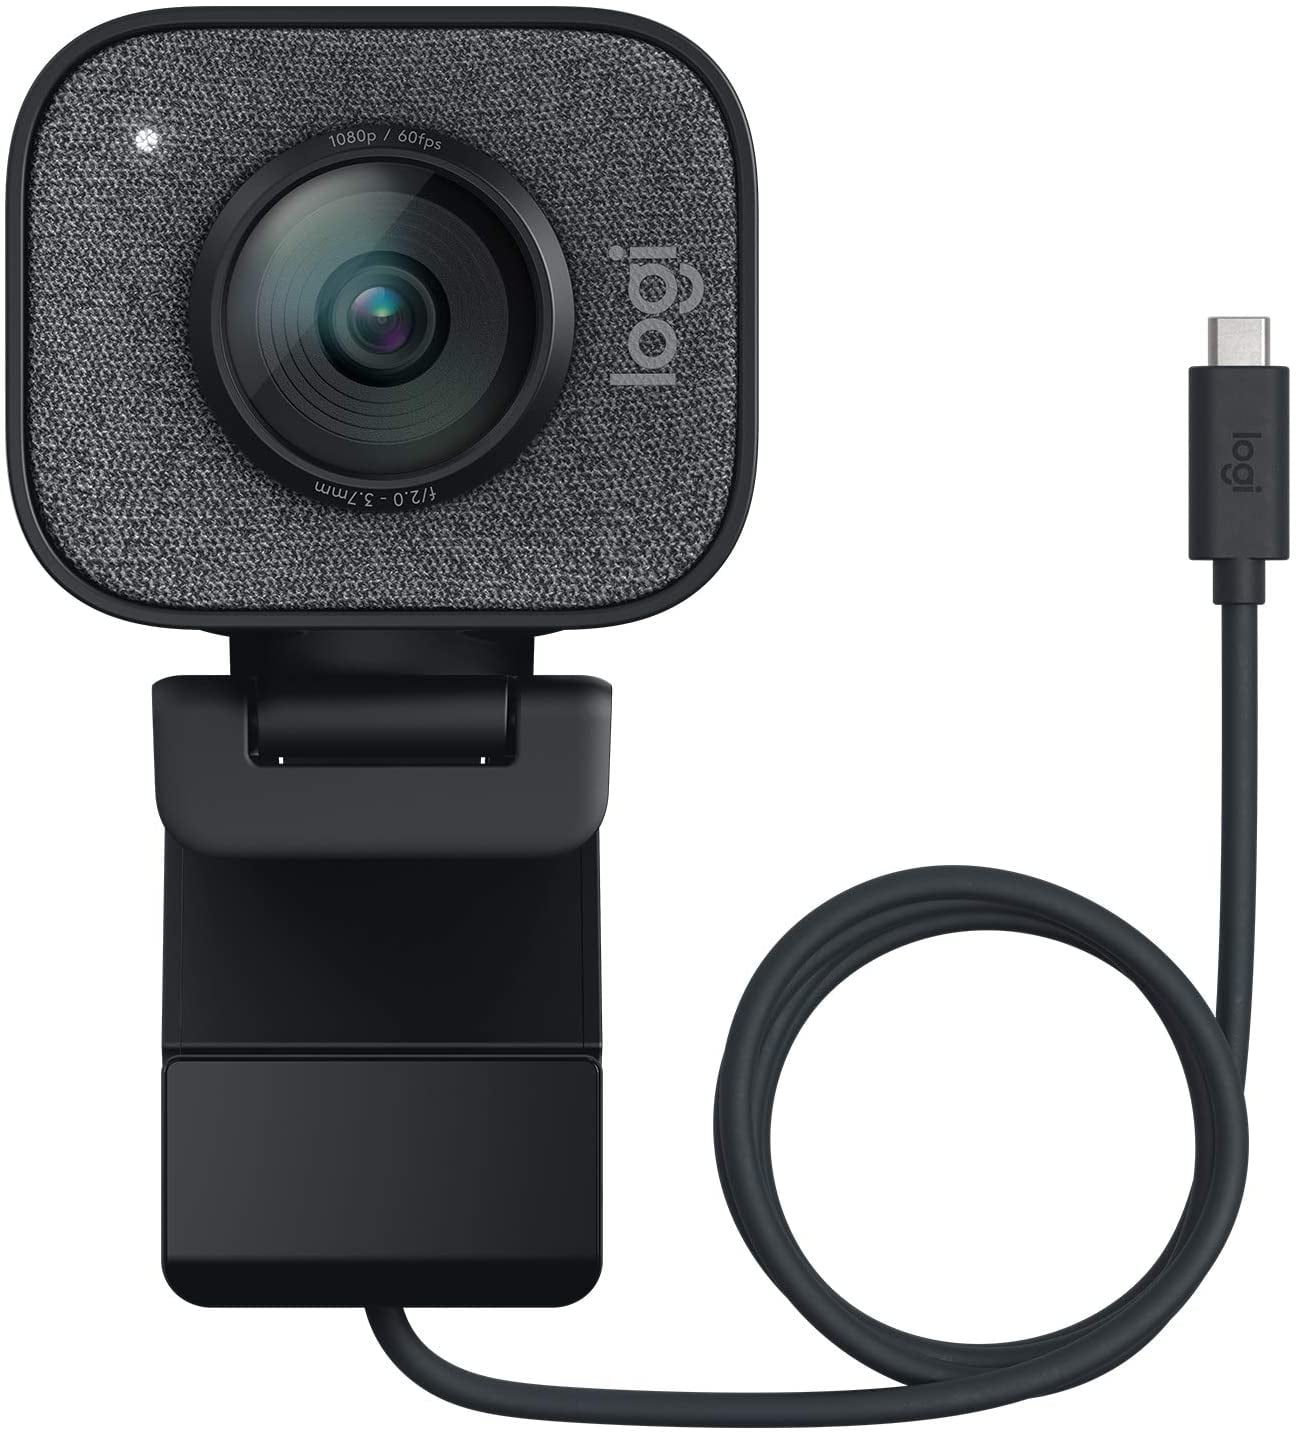 Logitech C920x Pro HD Webcam, Full HD 1080p Video Calling and Recording at  30 Fps 